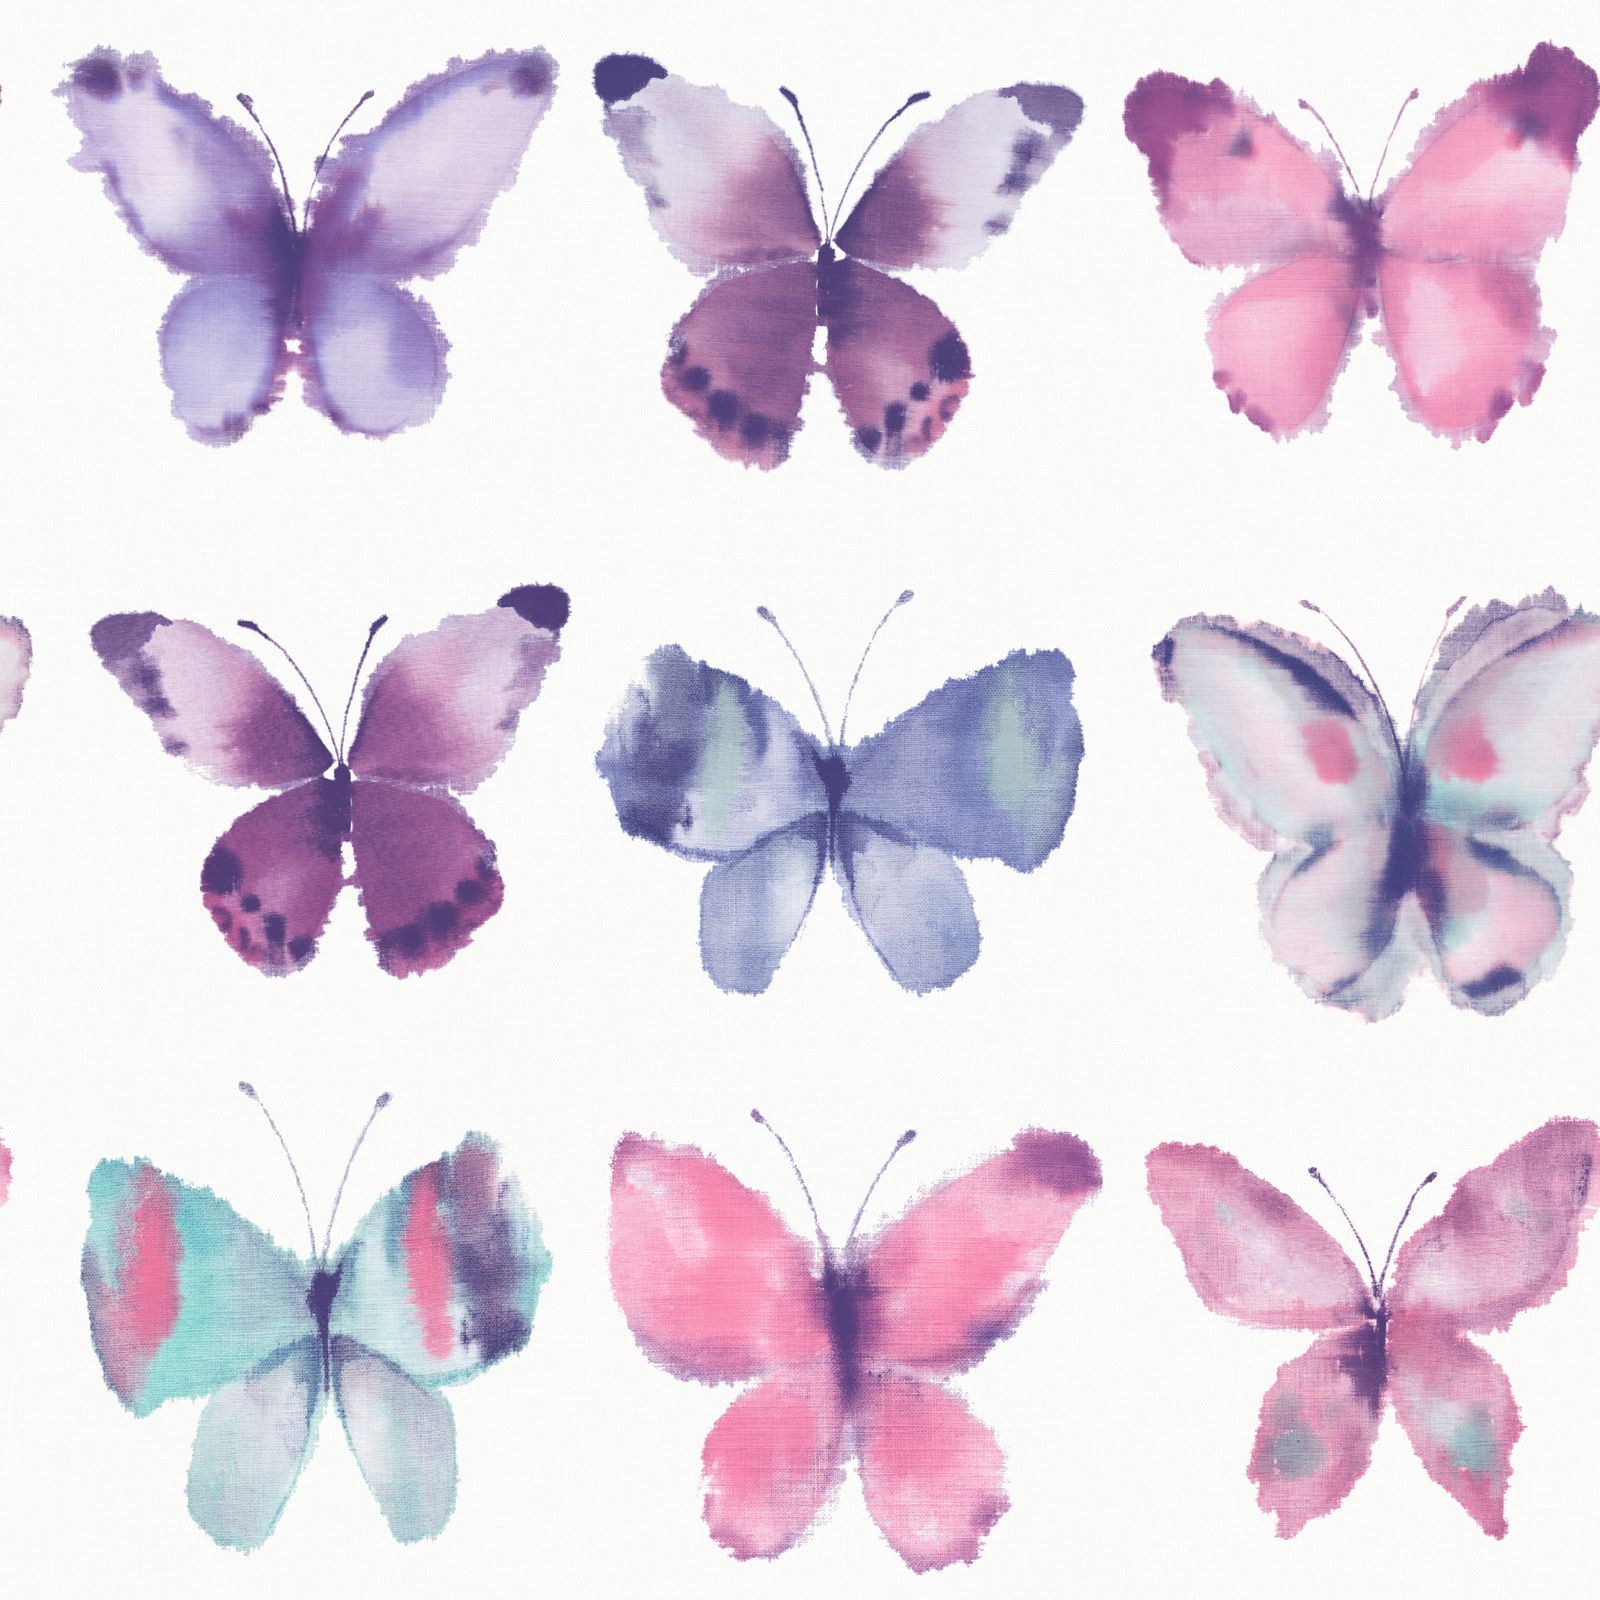 Girls Bedroom Butterfly Wallpaper In Pink White Teal More New P